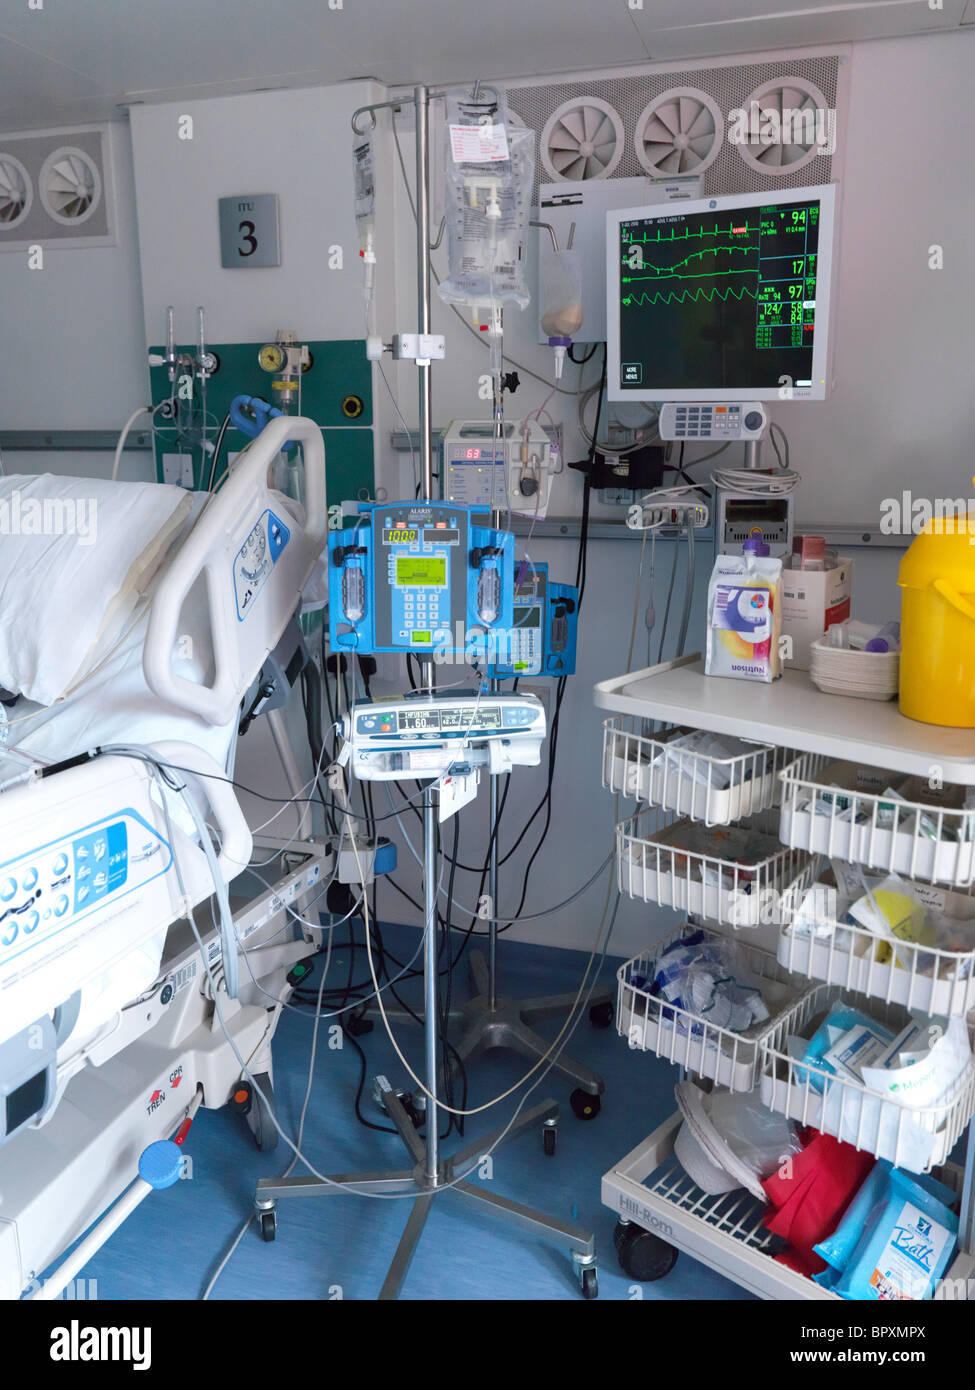 London England Private Intensive Care Unit die Infusion, Monitor zeigt Herzfrequenz Stockfoto